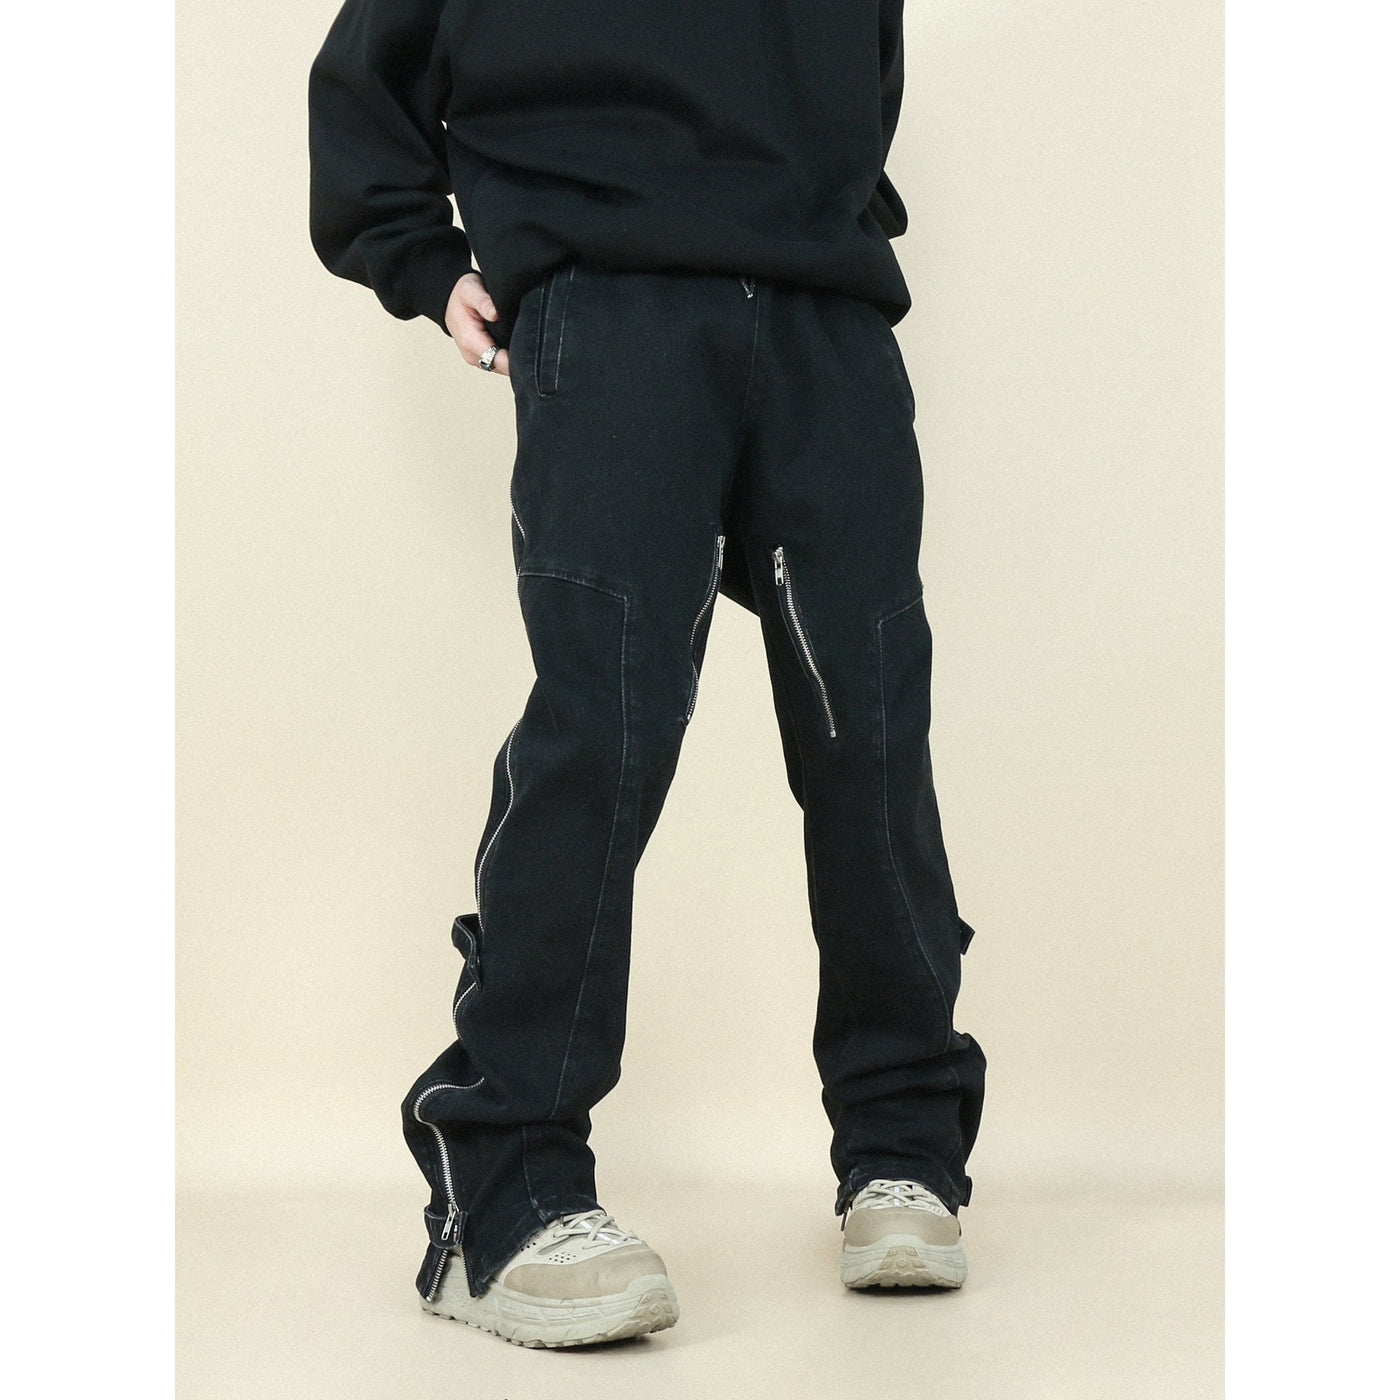 Mr. Nearly Side Zip Up Pants Korean Street Fashion Pants By Mr Nearly Shop Online at OH Vault